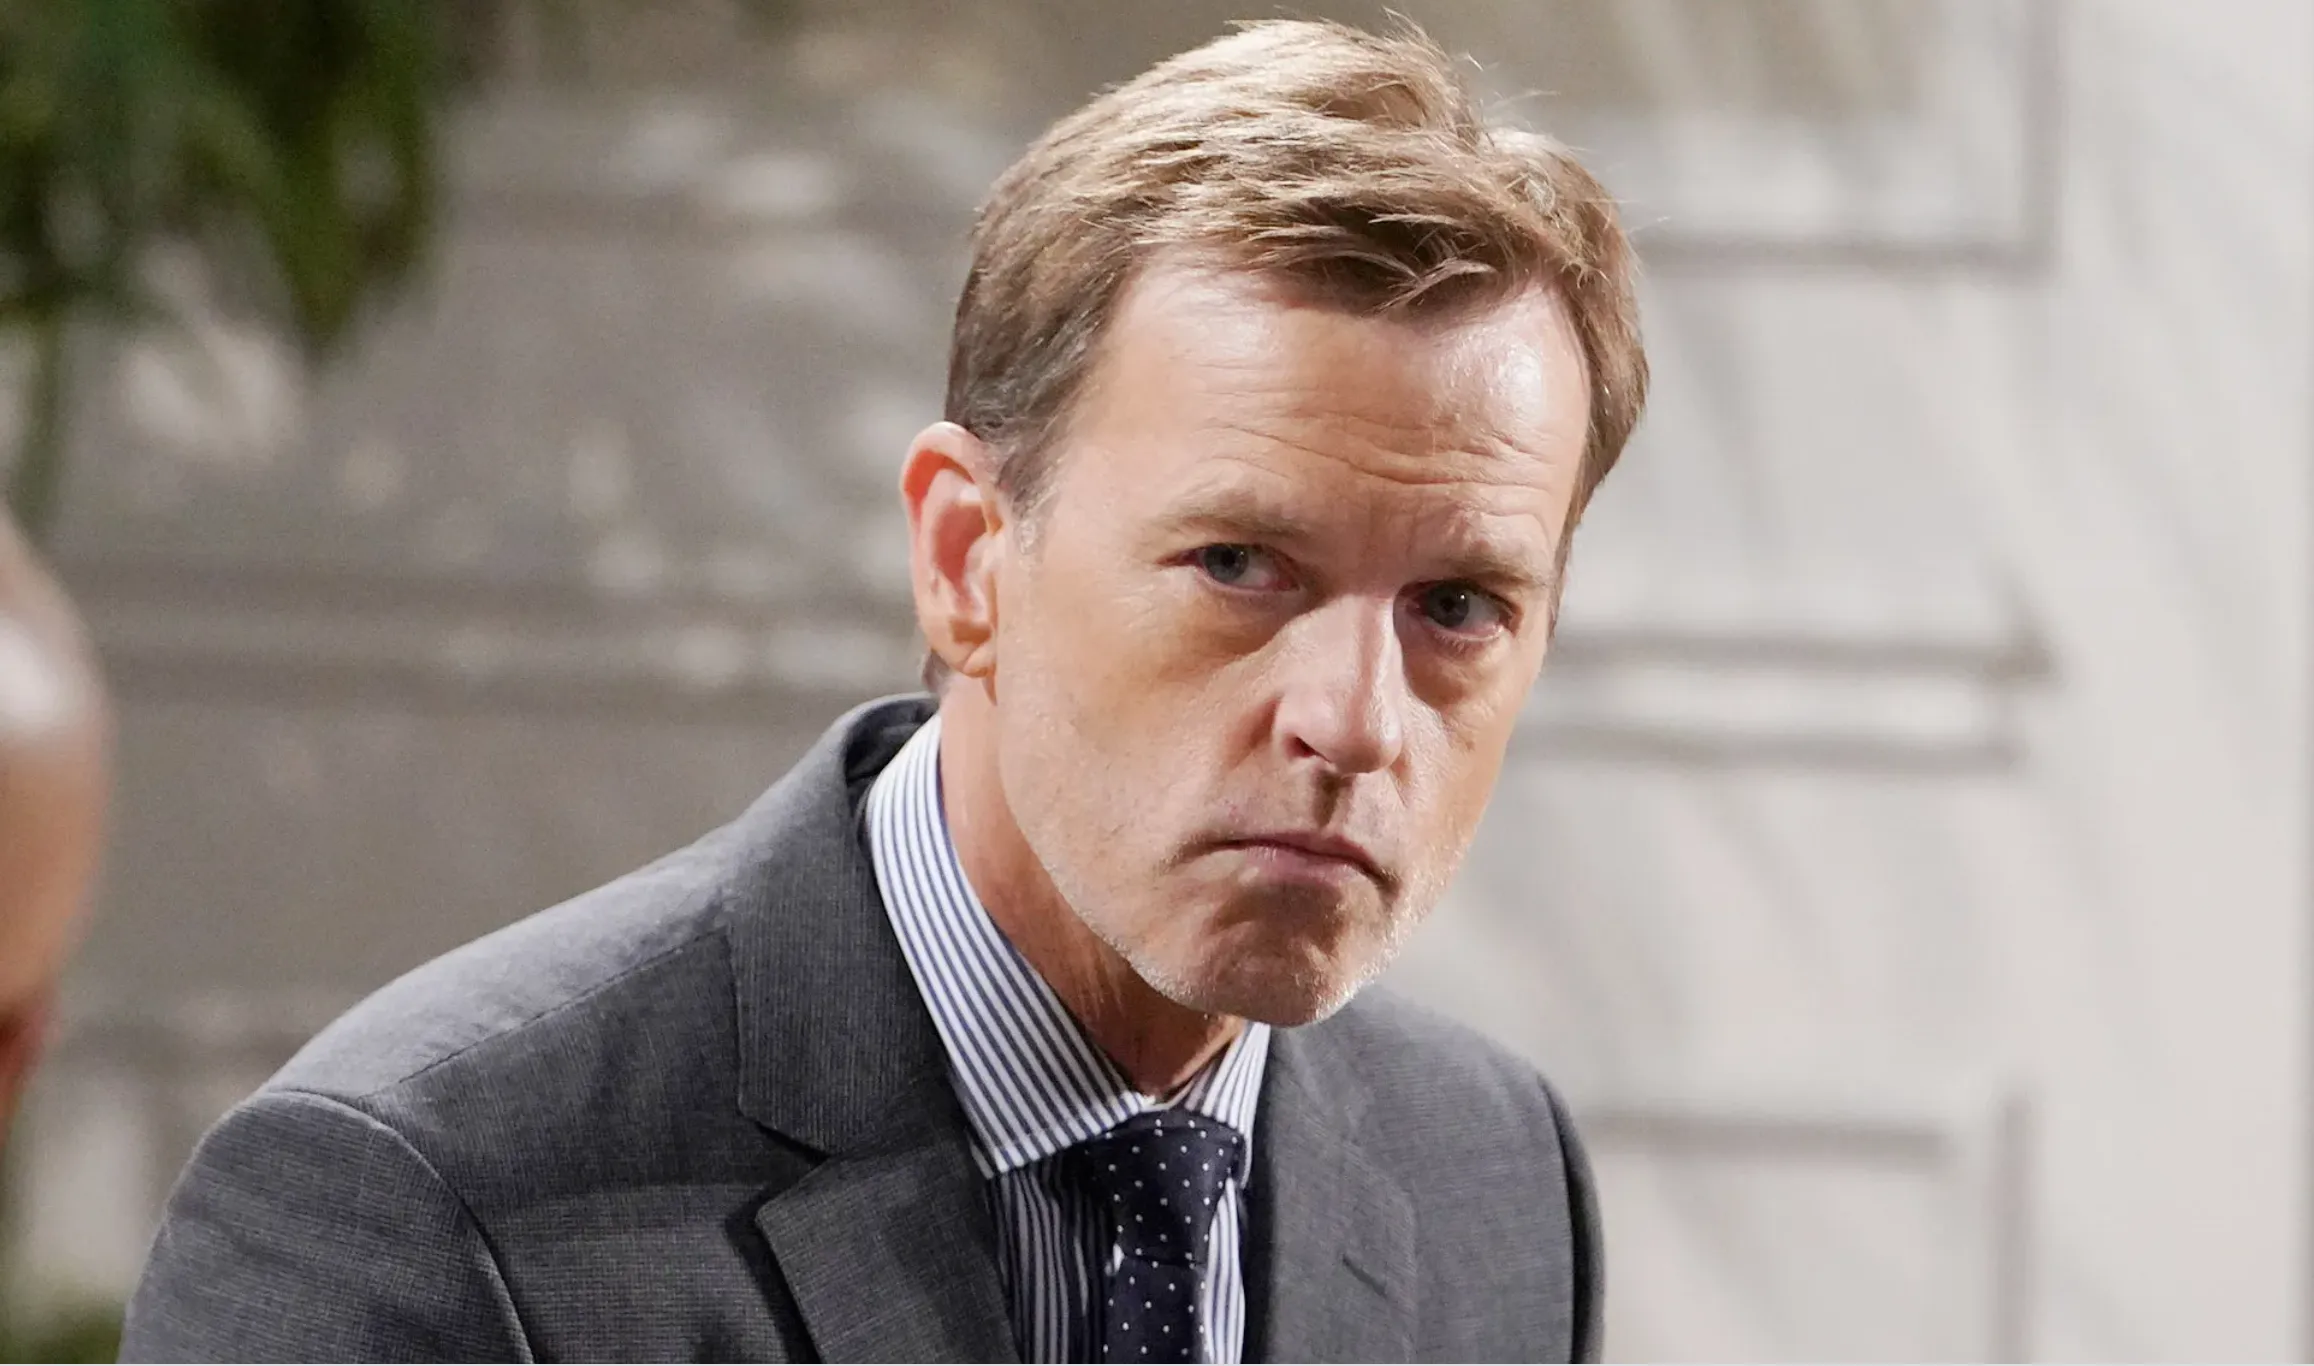 One Life to Live's Trevor St. John joins The Young and the Restless